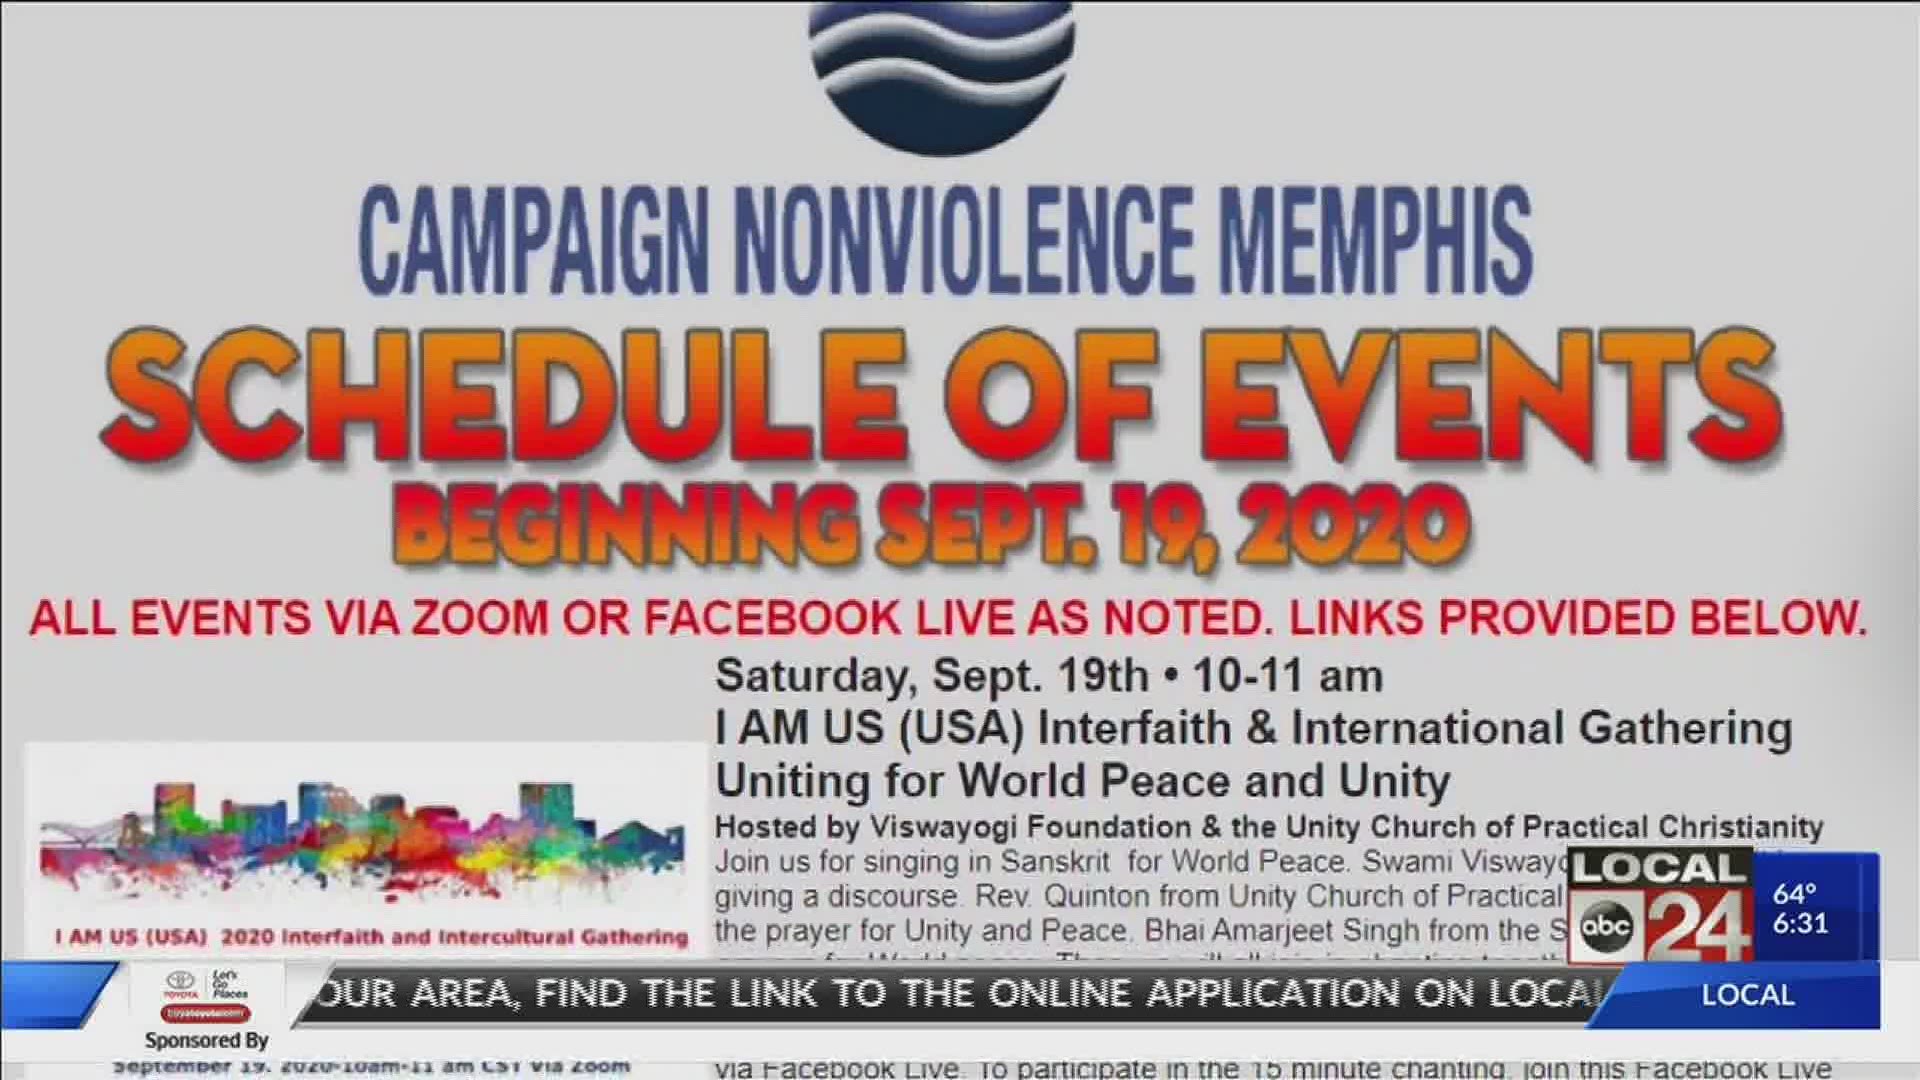 Organized by Campaign Nonviolence Memphis, the week features peace-centered events